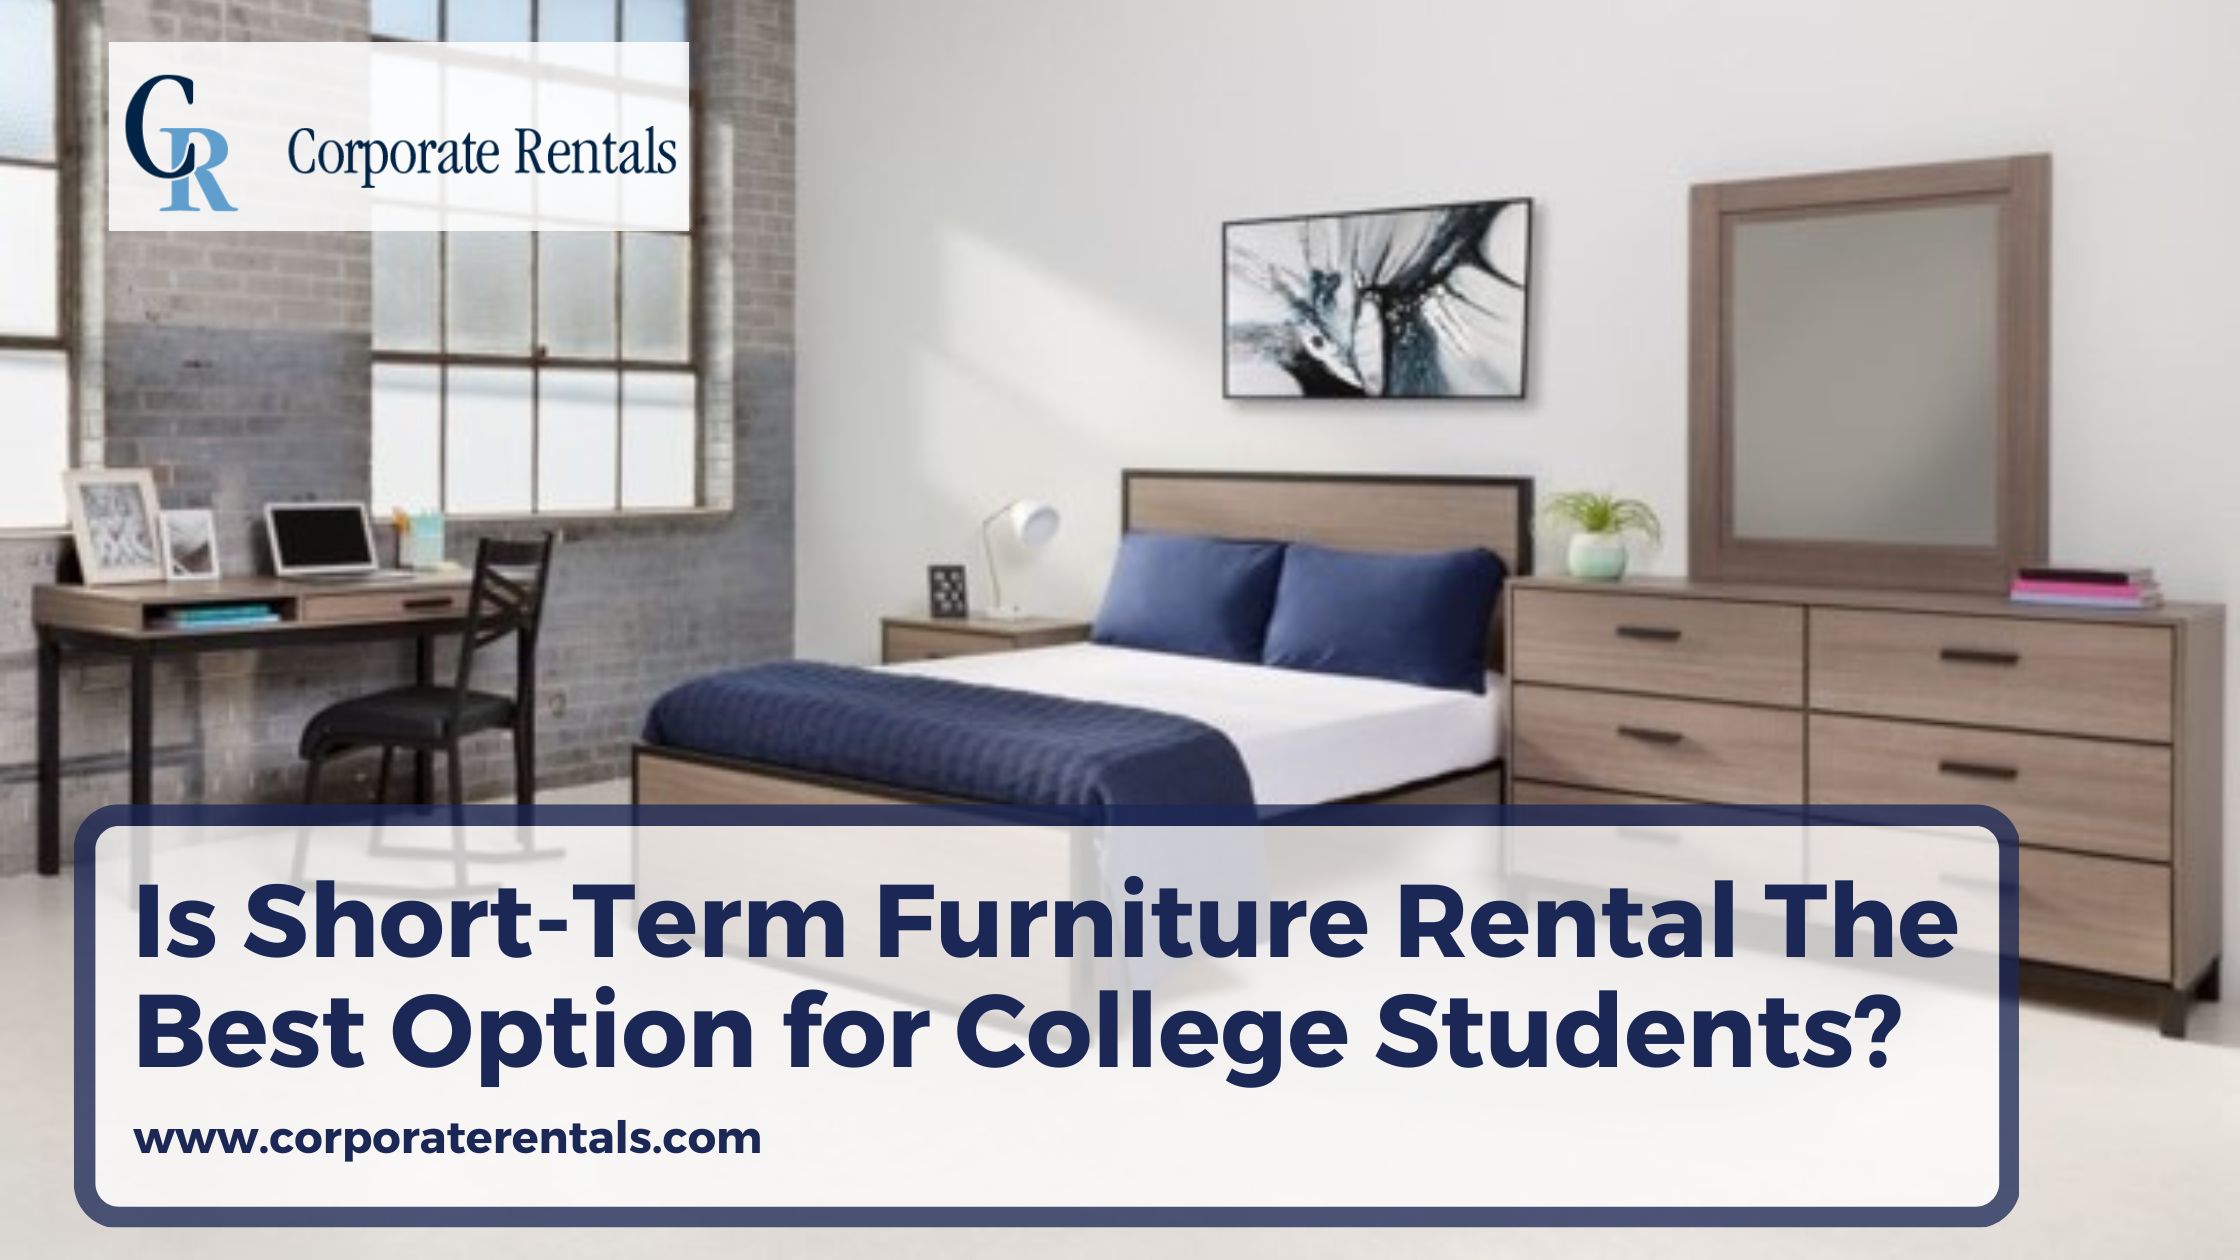 Is Short-Term Furniture Rental The Best Option for College Students?